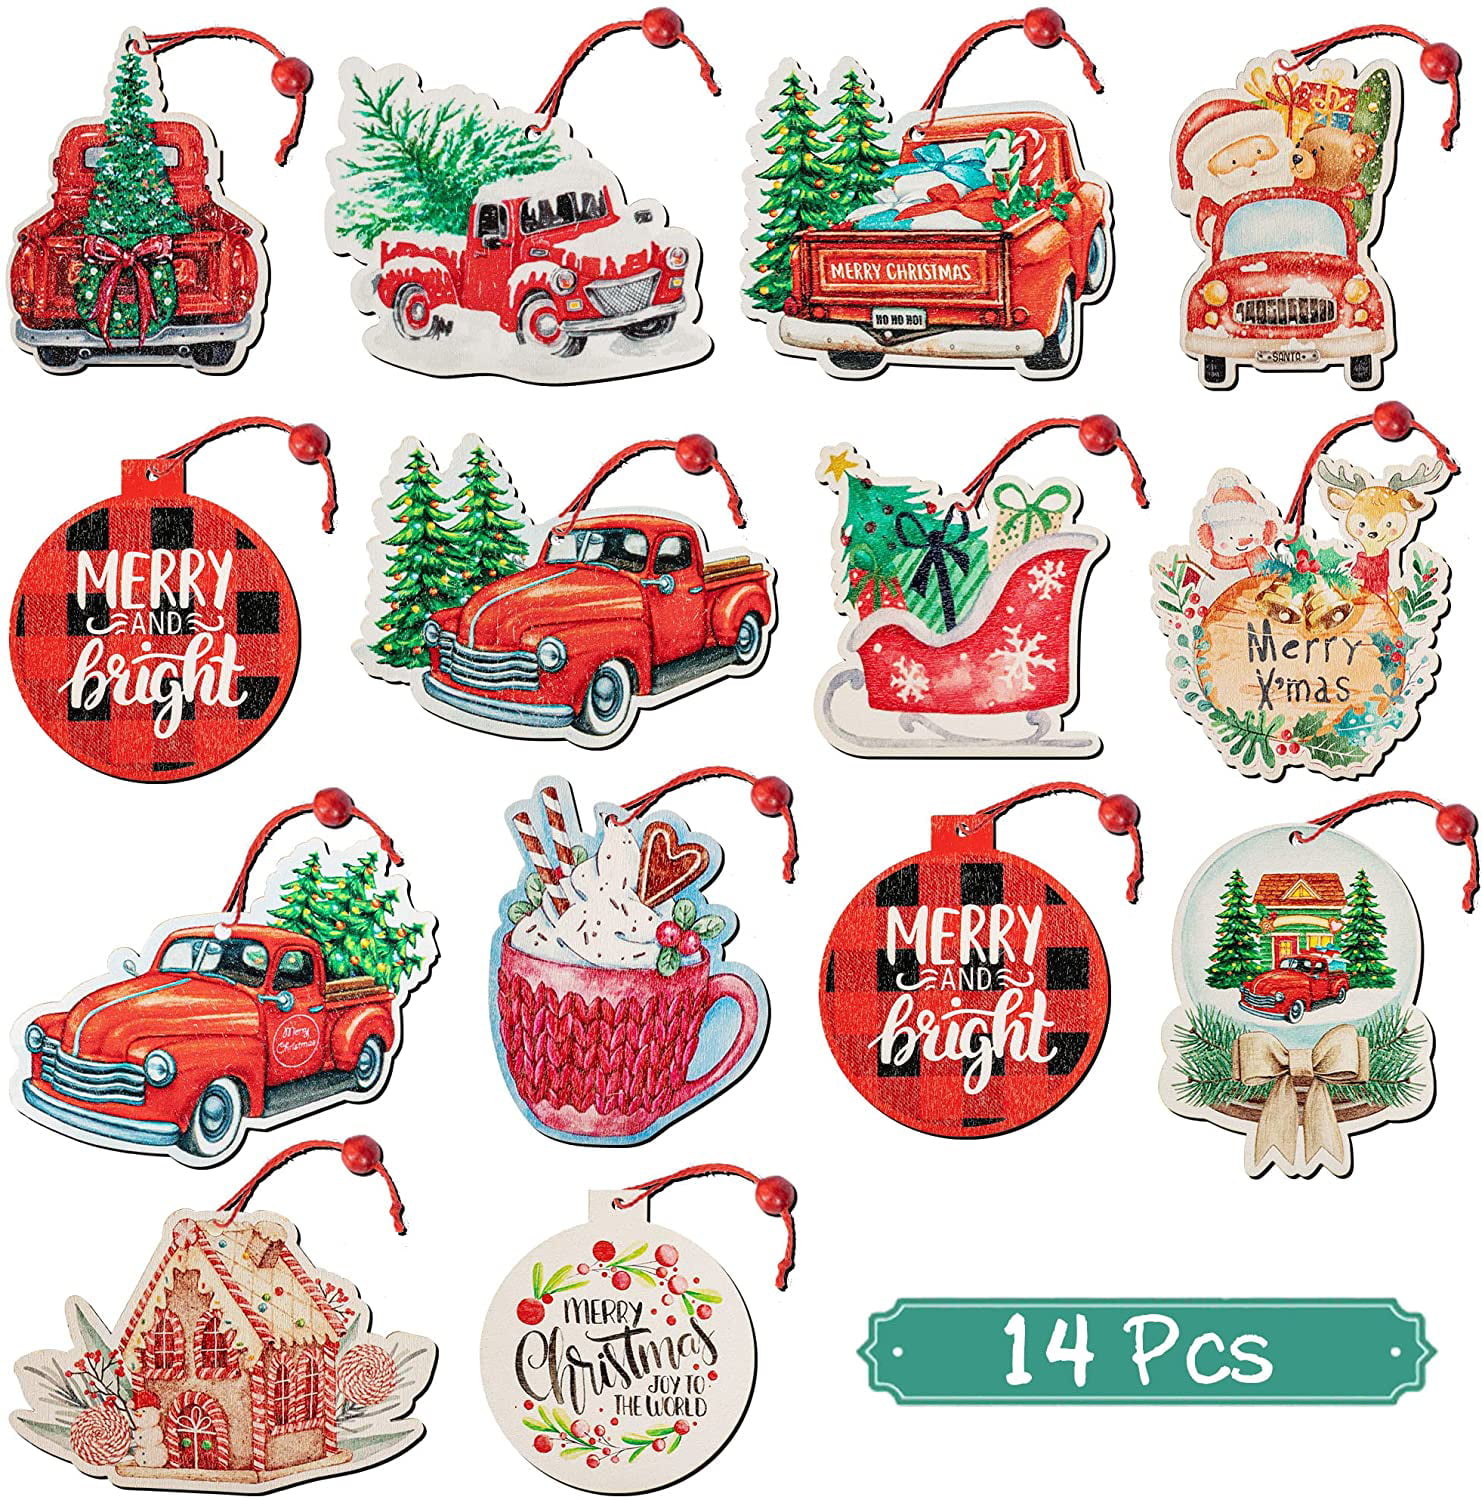 14 Pieces Wooden Christmas Ornaments Red Truck Christmas Tree Decoration Wood Truck Hanging Crafts Farmhouse Xmas Hanging Ornaments for Christmas Tree Ornament Home Fireplace Hanging Decor